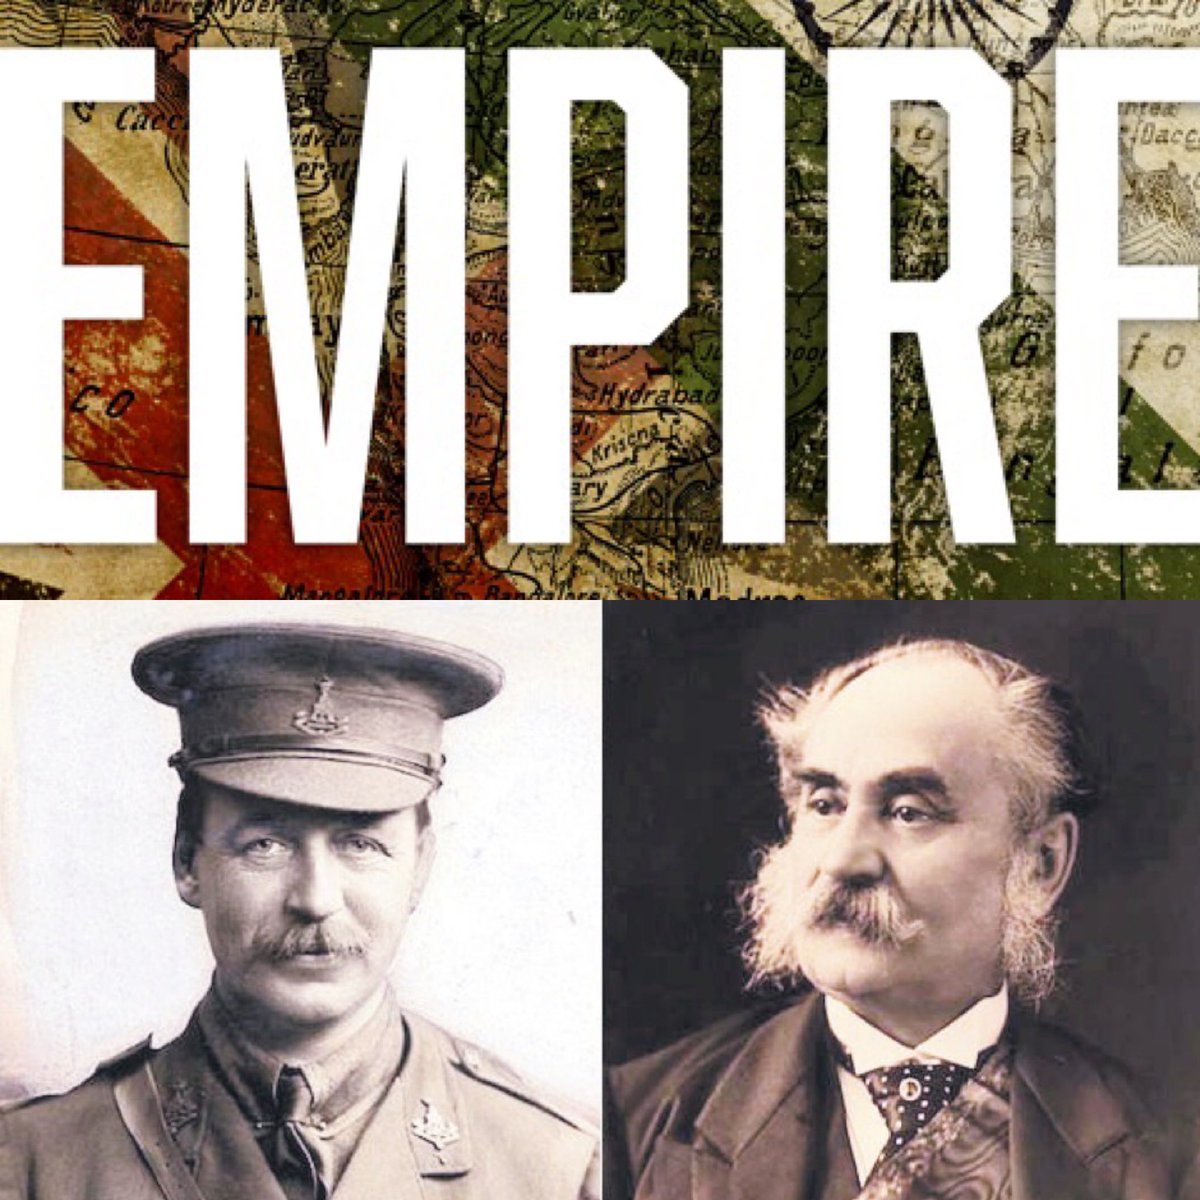 This week on @EmpirePodUK Sykes-Picot: Carving up the Middle-East @tweeter_anita + @DalrympleWill discuss the secret plans between the British and the French to divide and share the Ottoman Empire… with long term consequences we still feel today.